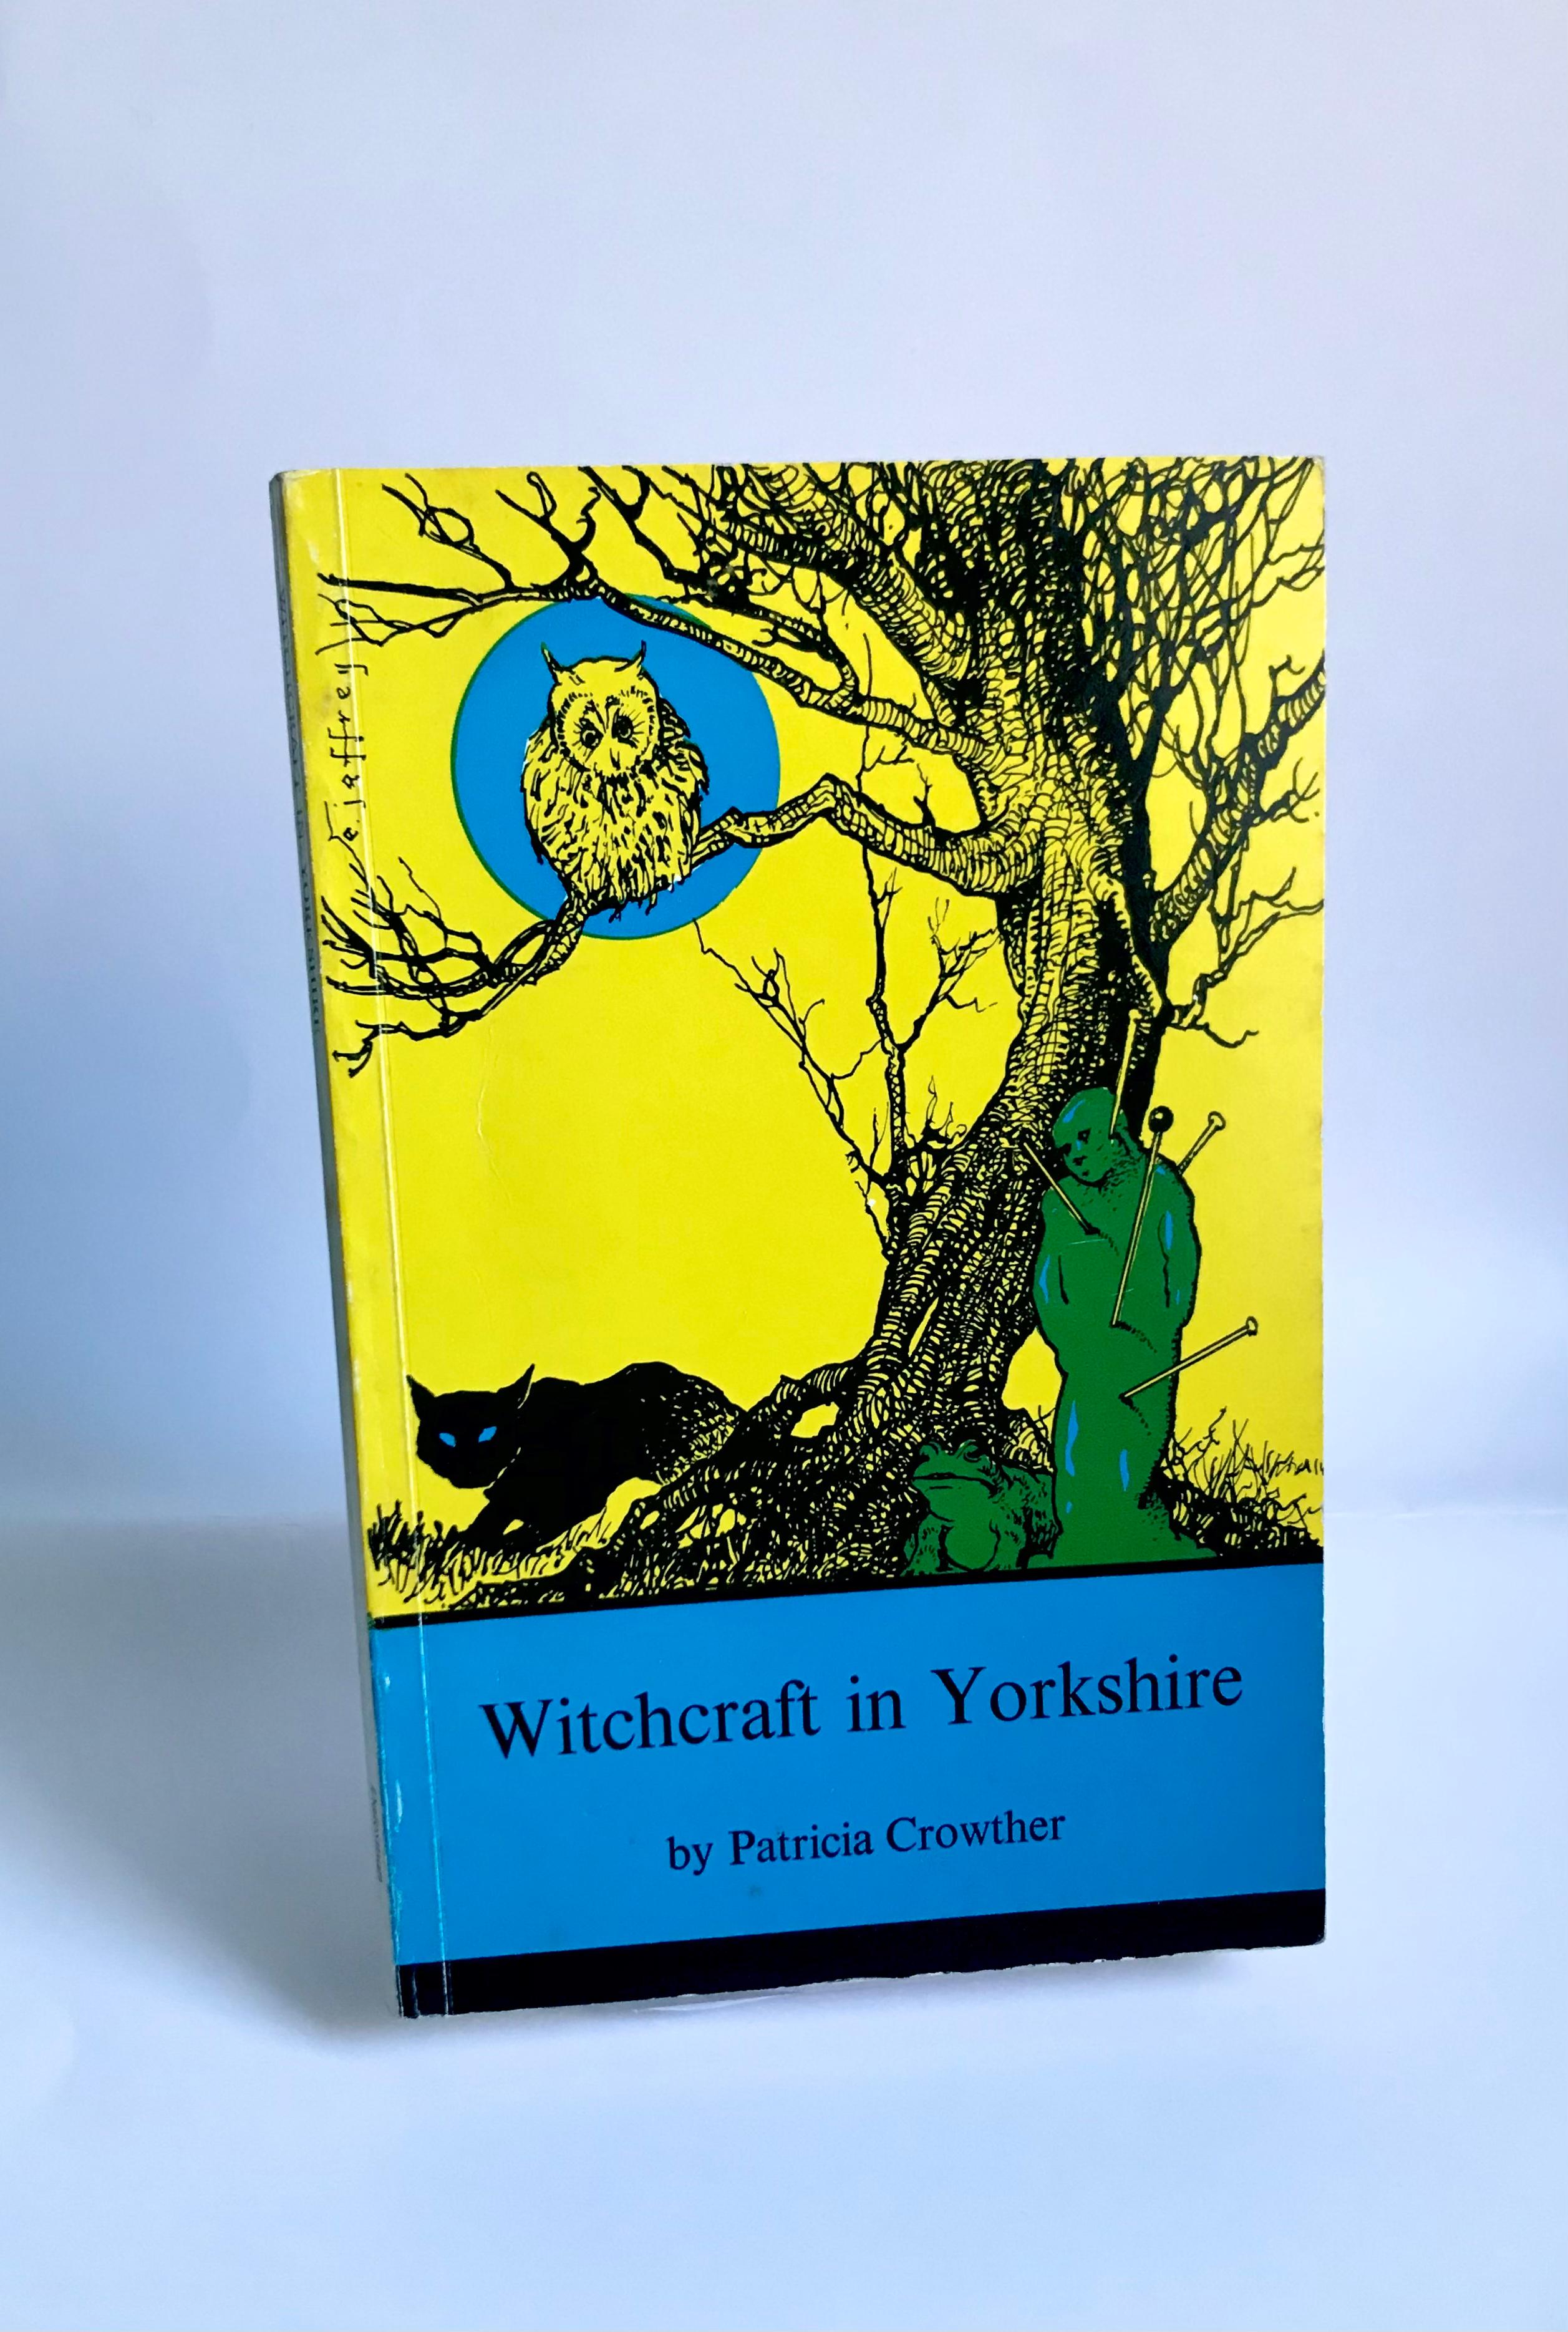 Witchcraft in Yorkshire by Patricia Crowther